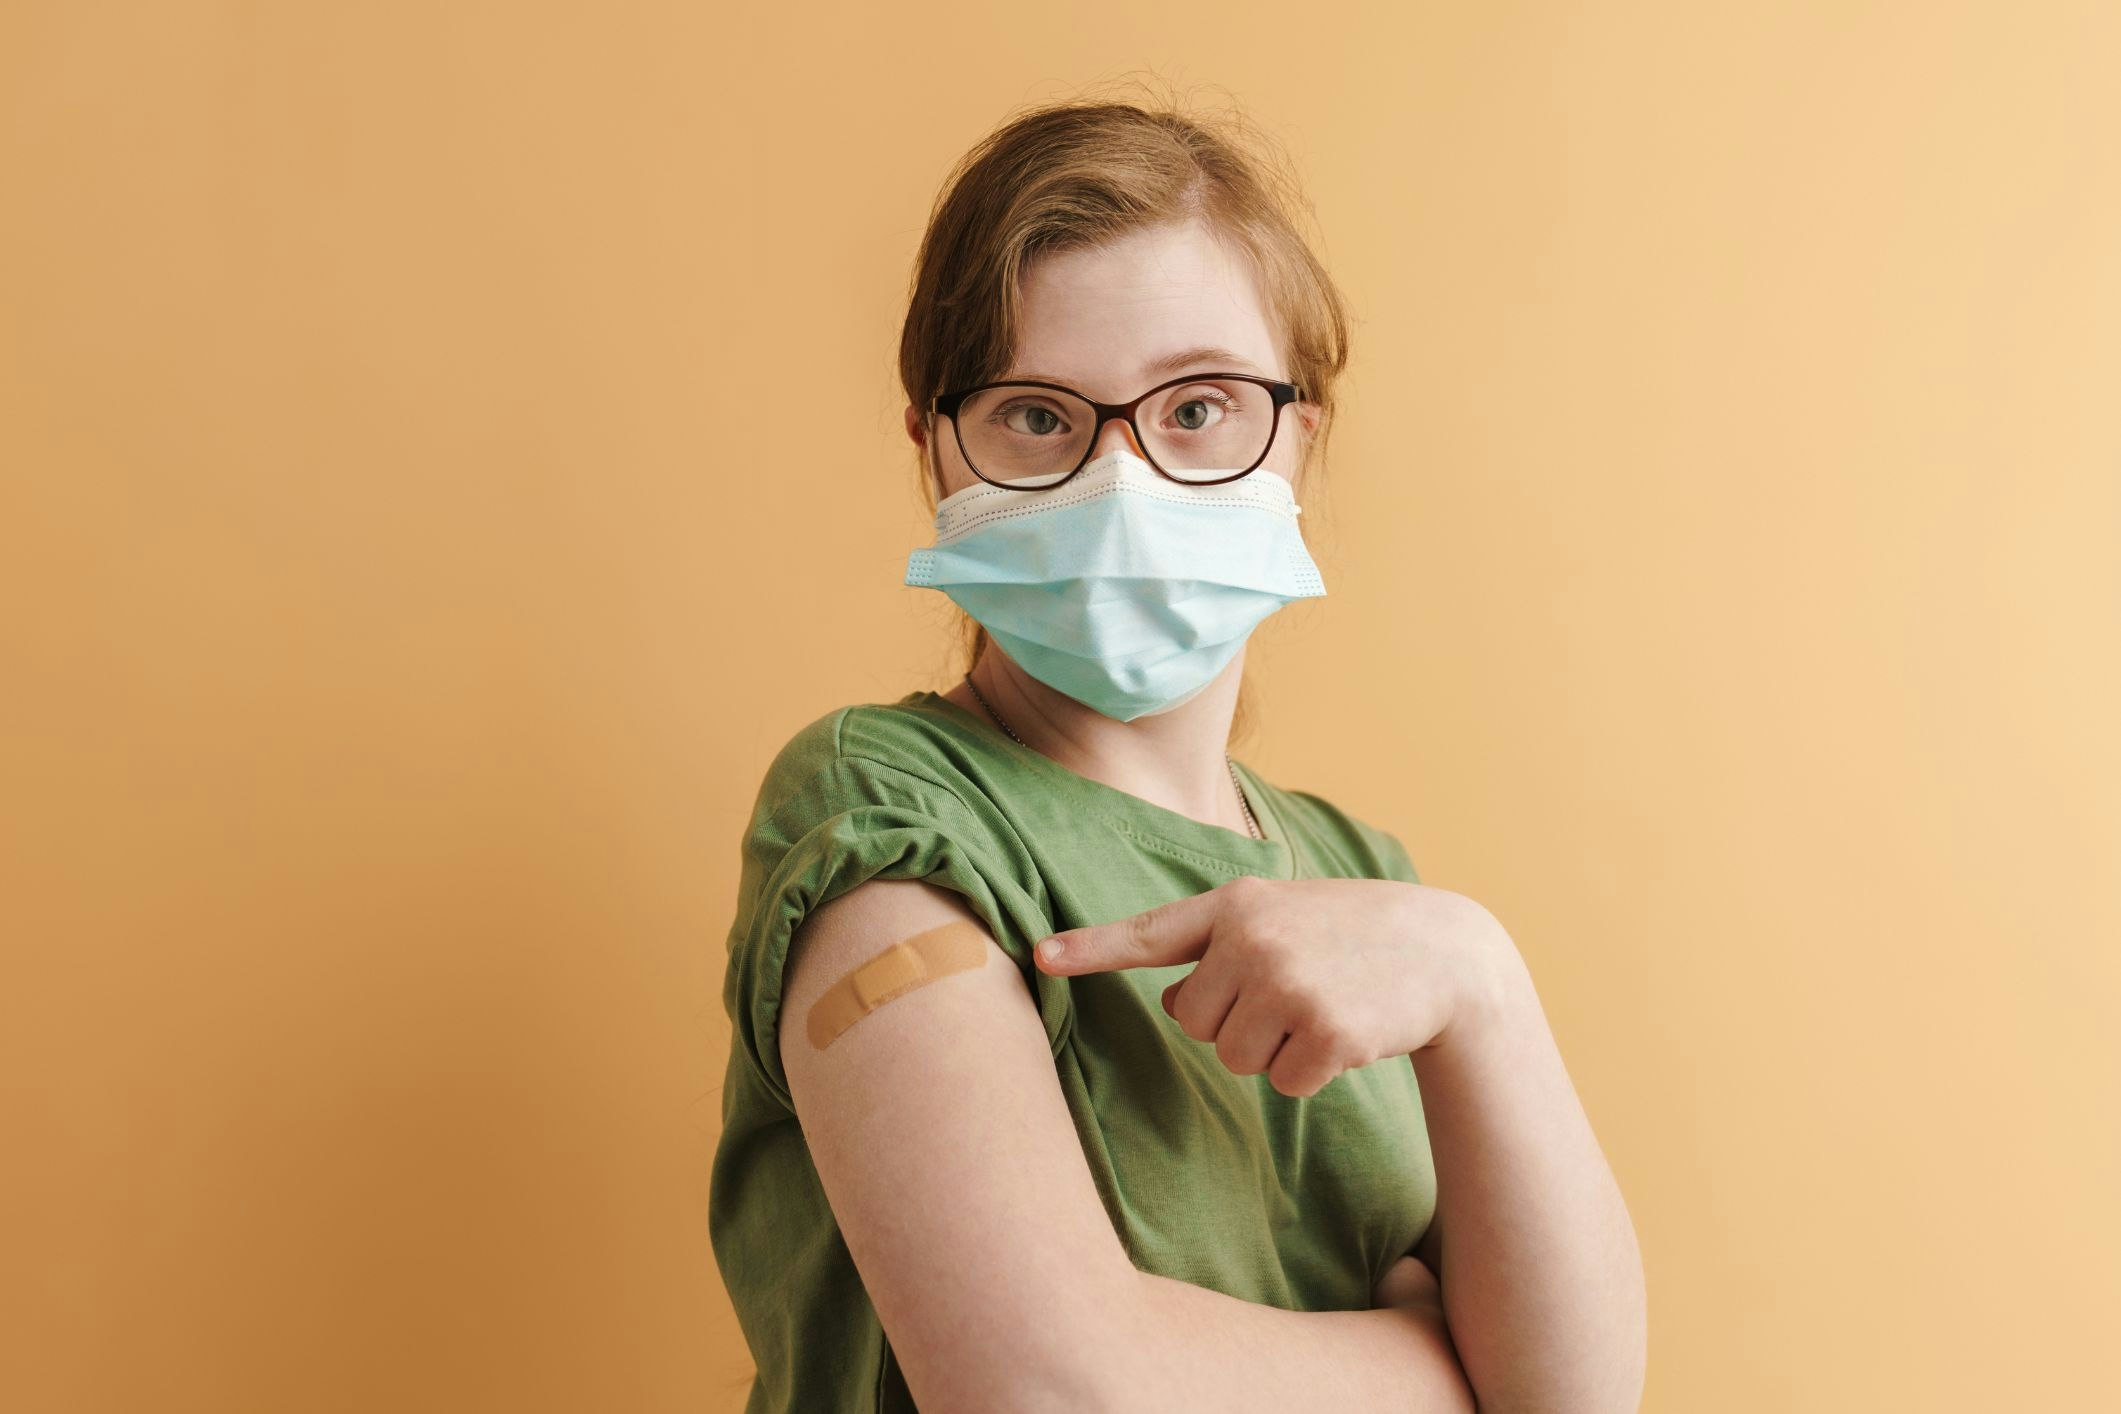 Getting an annual vaccination can help protect you from influenza, but are administration clinics accessible enough for people with disability? [Source: Shutterstock]
